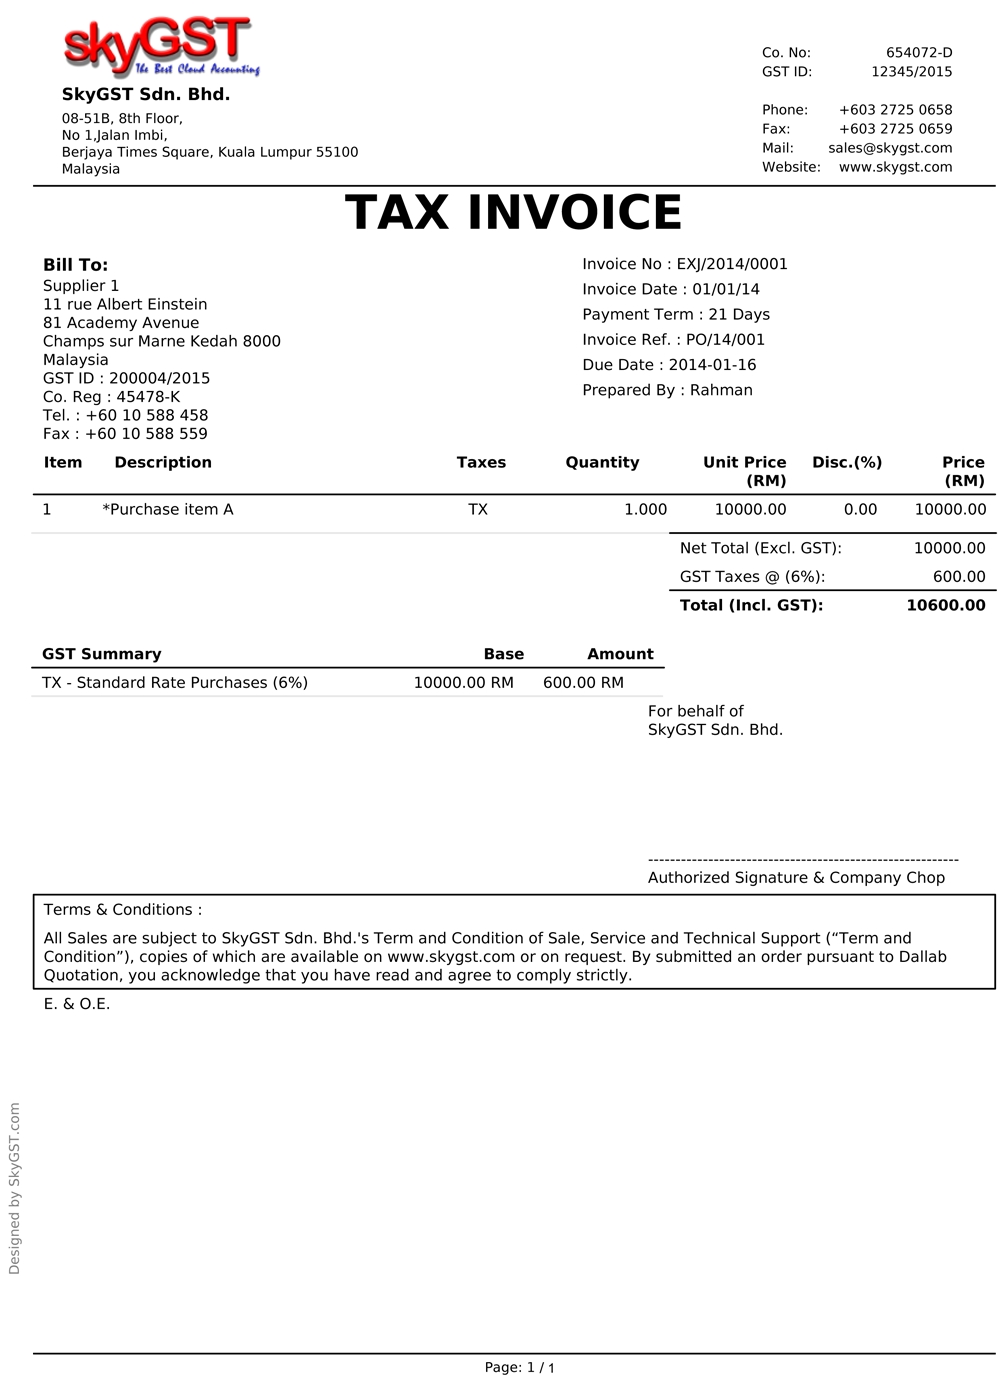 this tax invoice ok or not tax invoice requirements